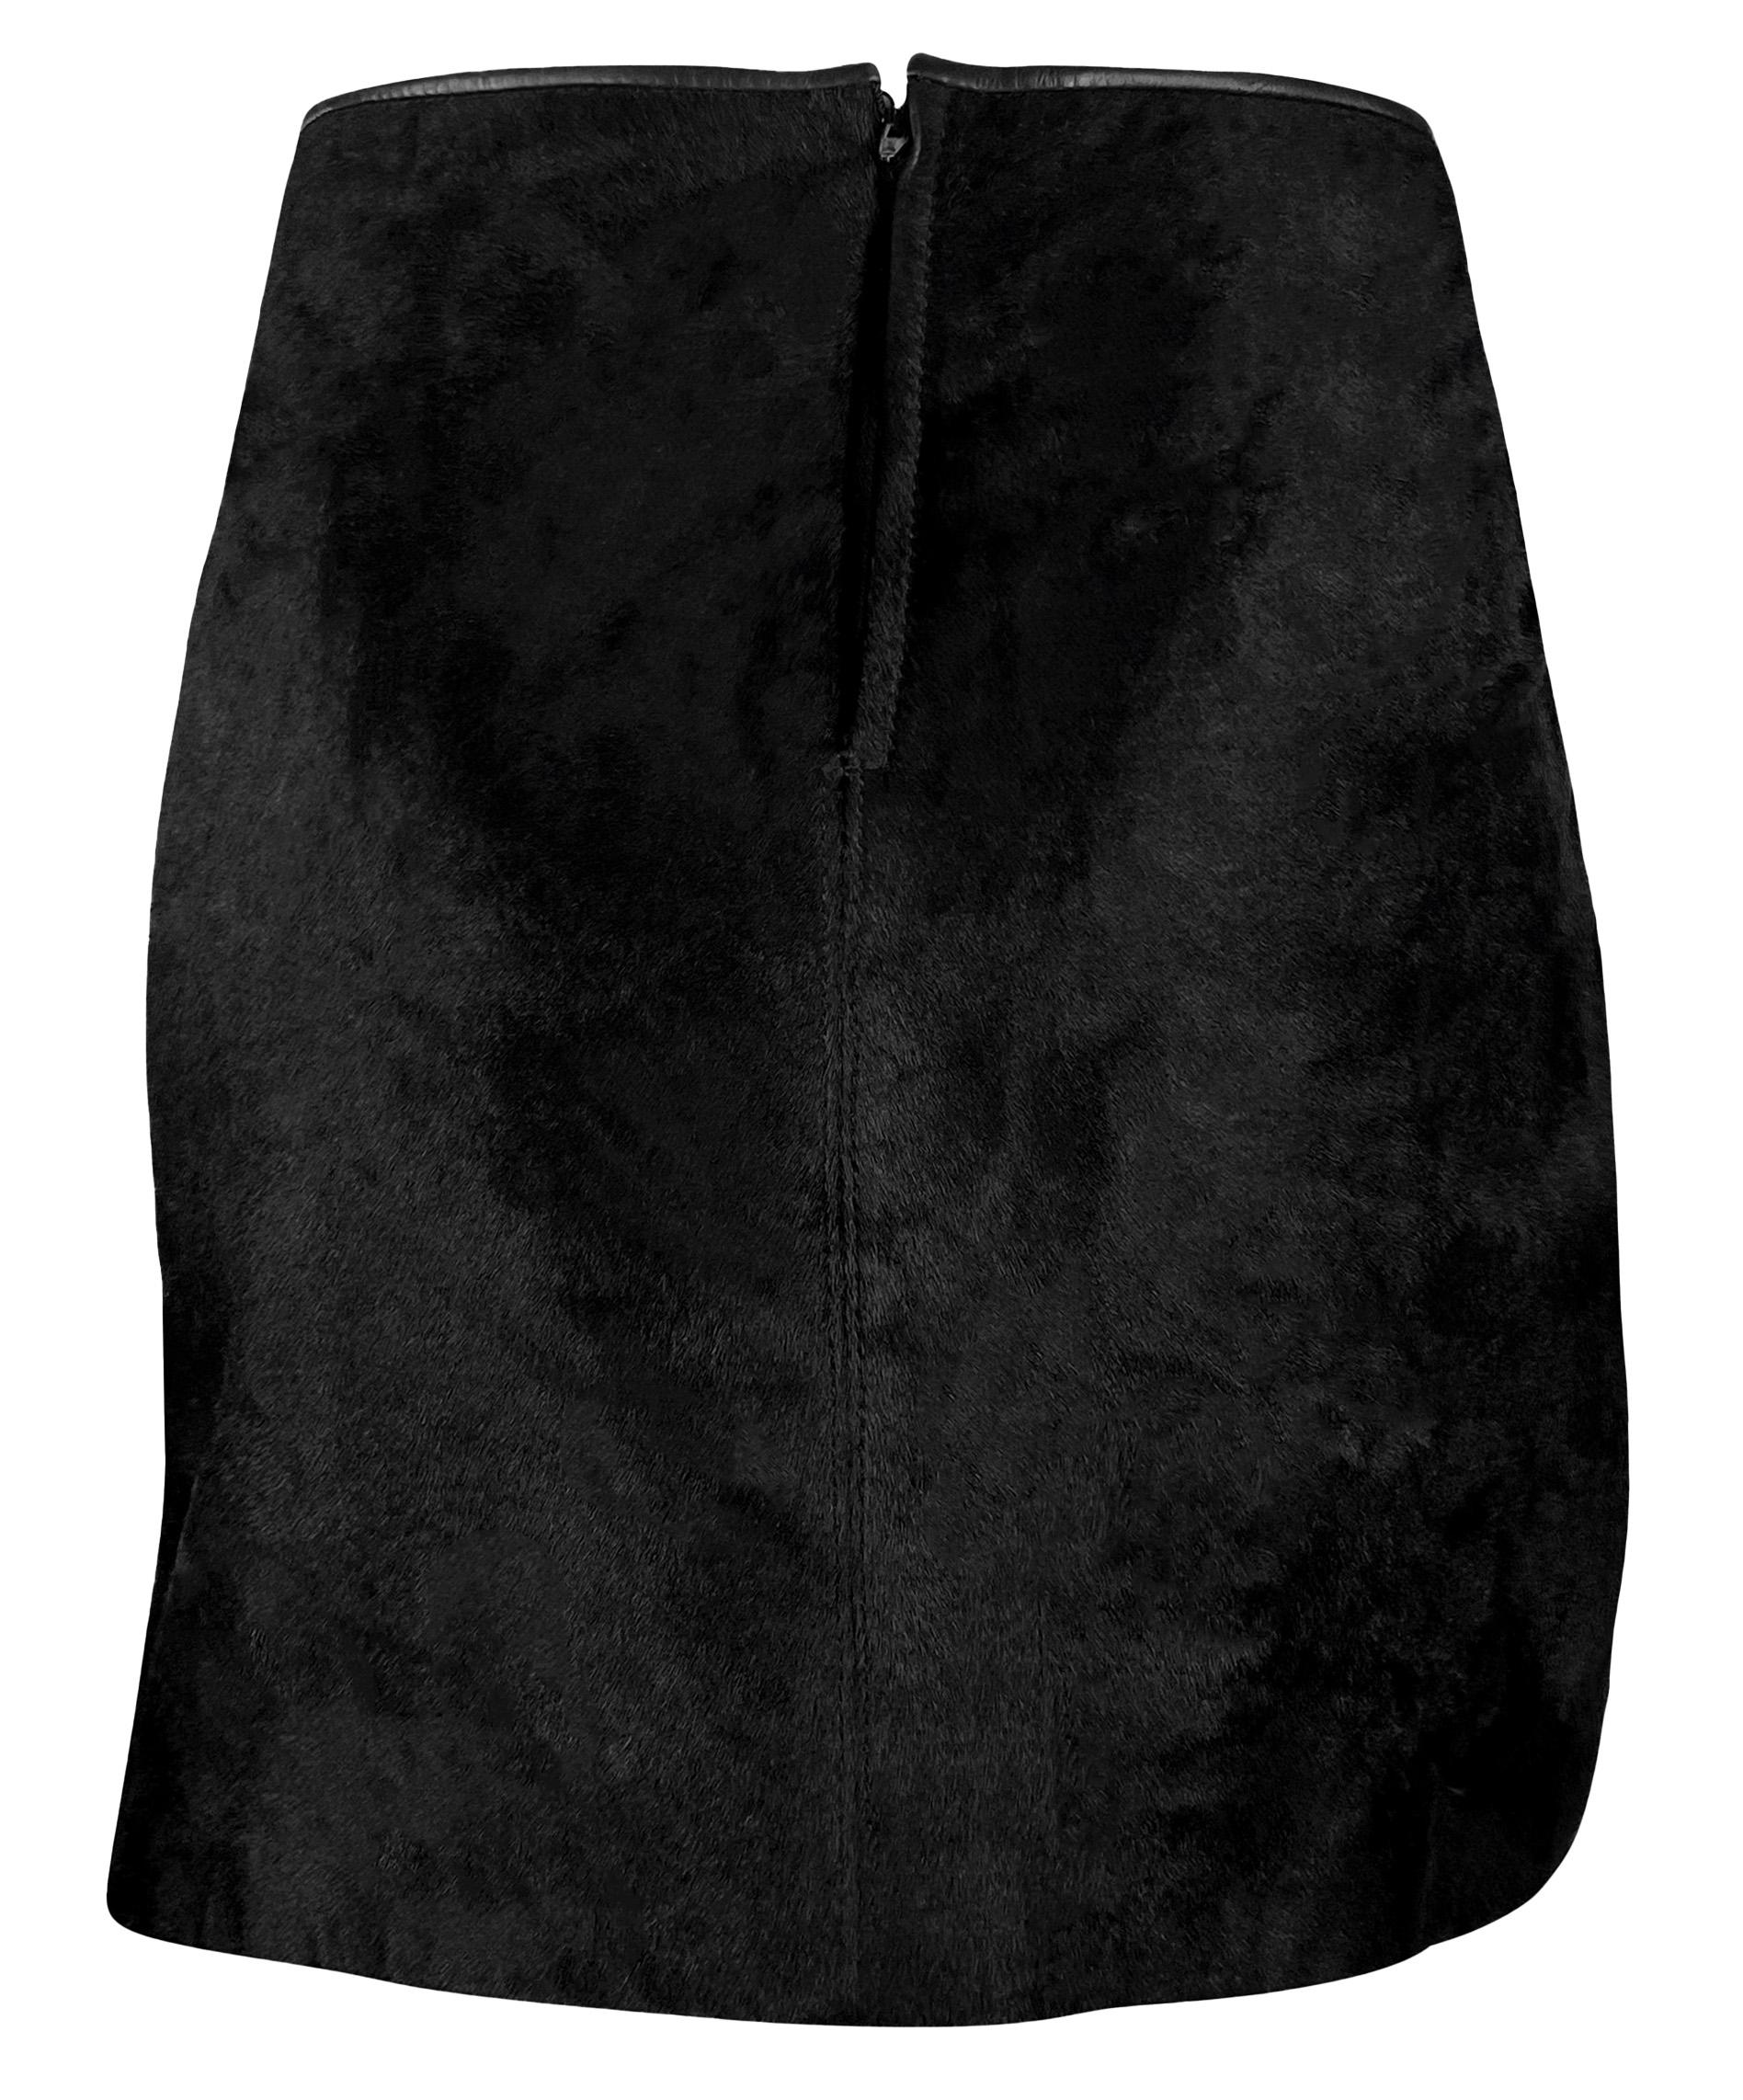 1990s Dolce & Gabbana Black Ponyhair Cowhide Leather Trim Wrap Style Mini Skirt In Excellent Condition For Sale In West Hollywood, CA